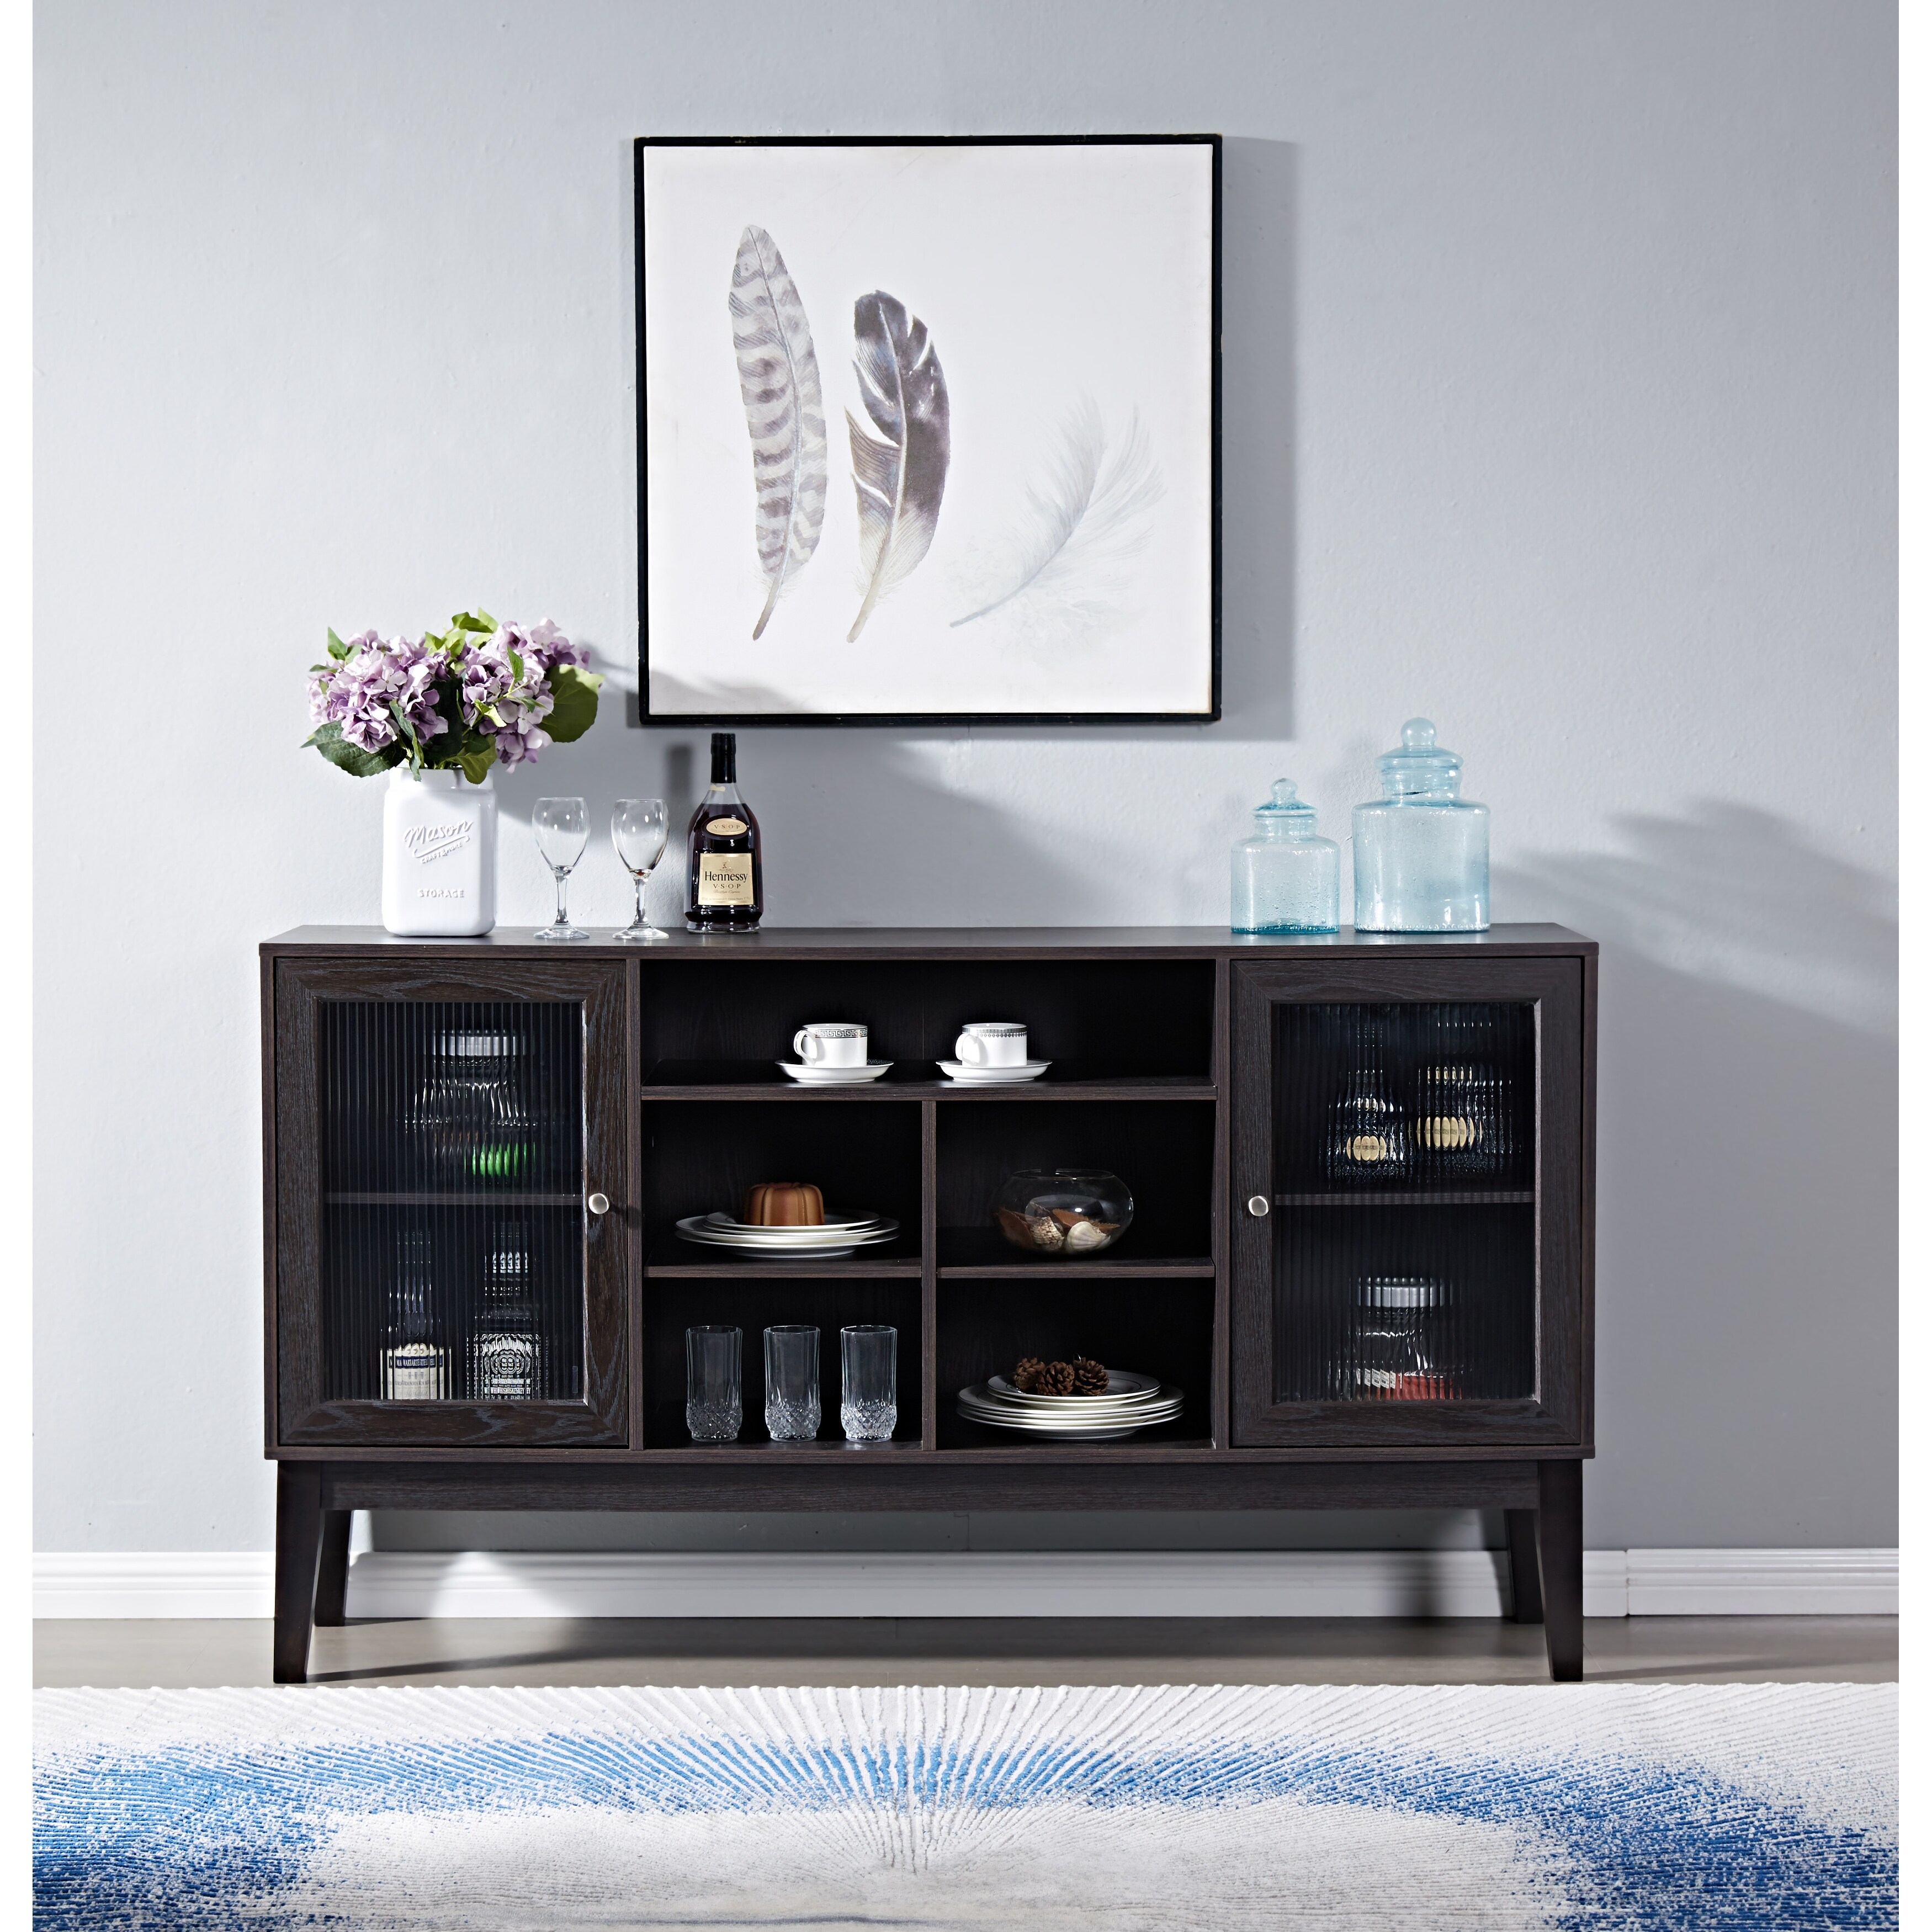 High Quality 60 Wood Tv Stand Console With 4 Doors  Solid Wood Legs  Ample Storage Space  And Exquisite Hardware Accessories